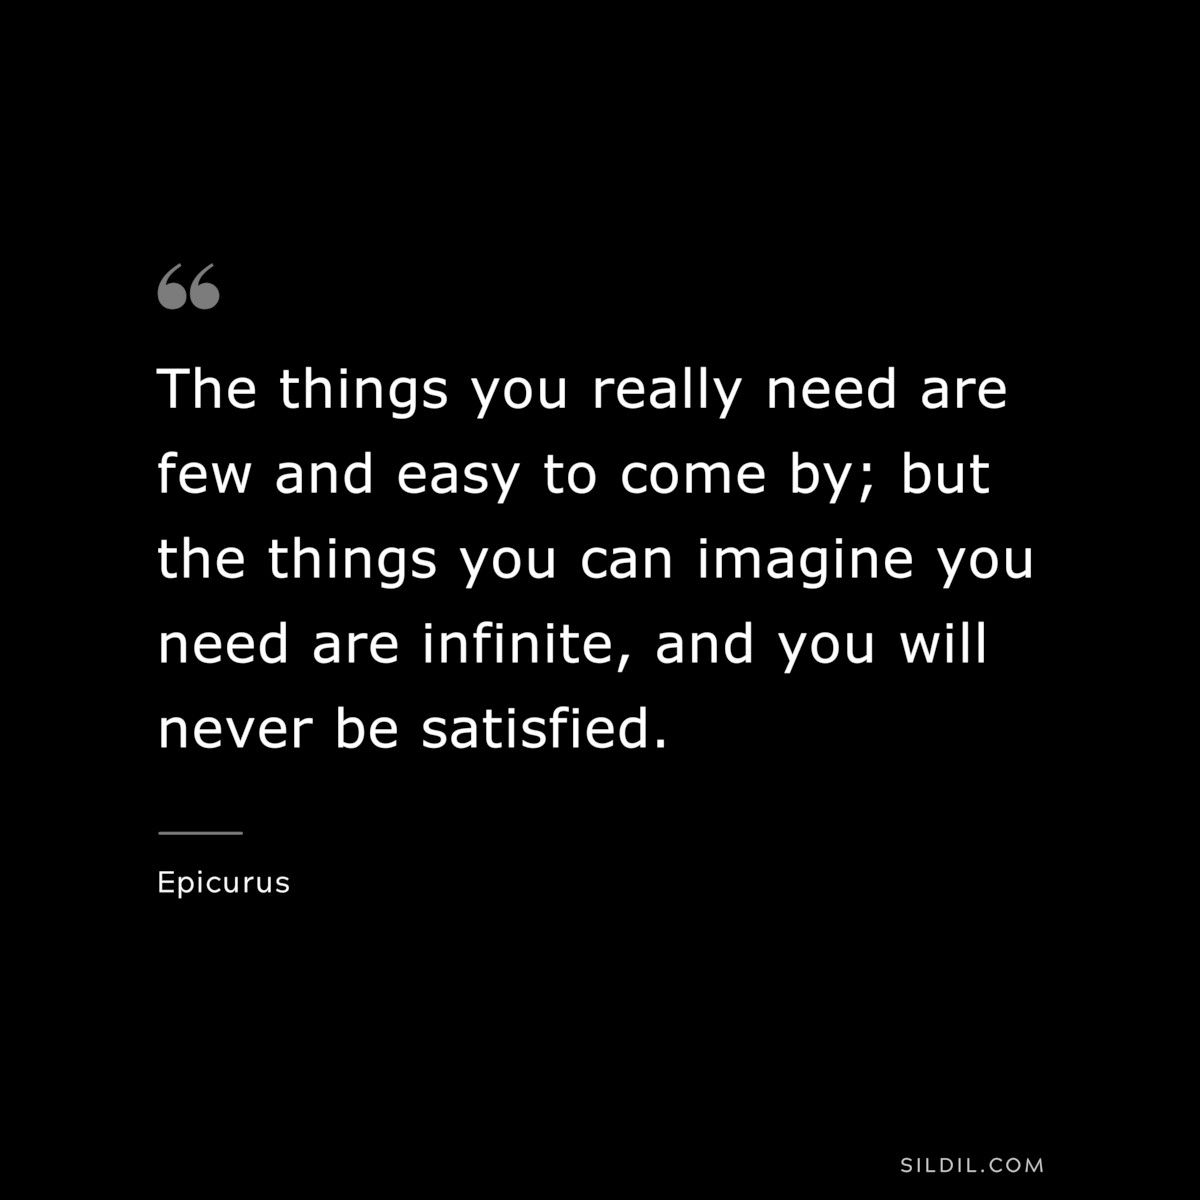 The things you really need are few and easy to come by; but the things you can imagine you need are infinite, and you will never be satisfied. — Epicurus